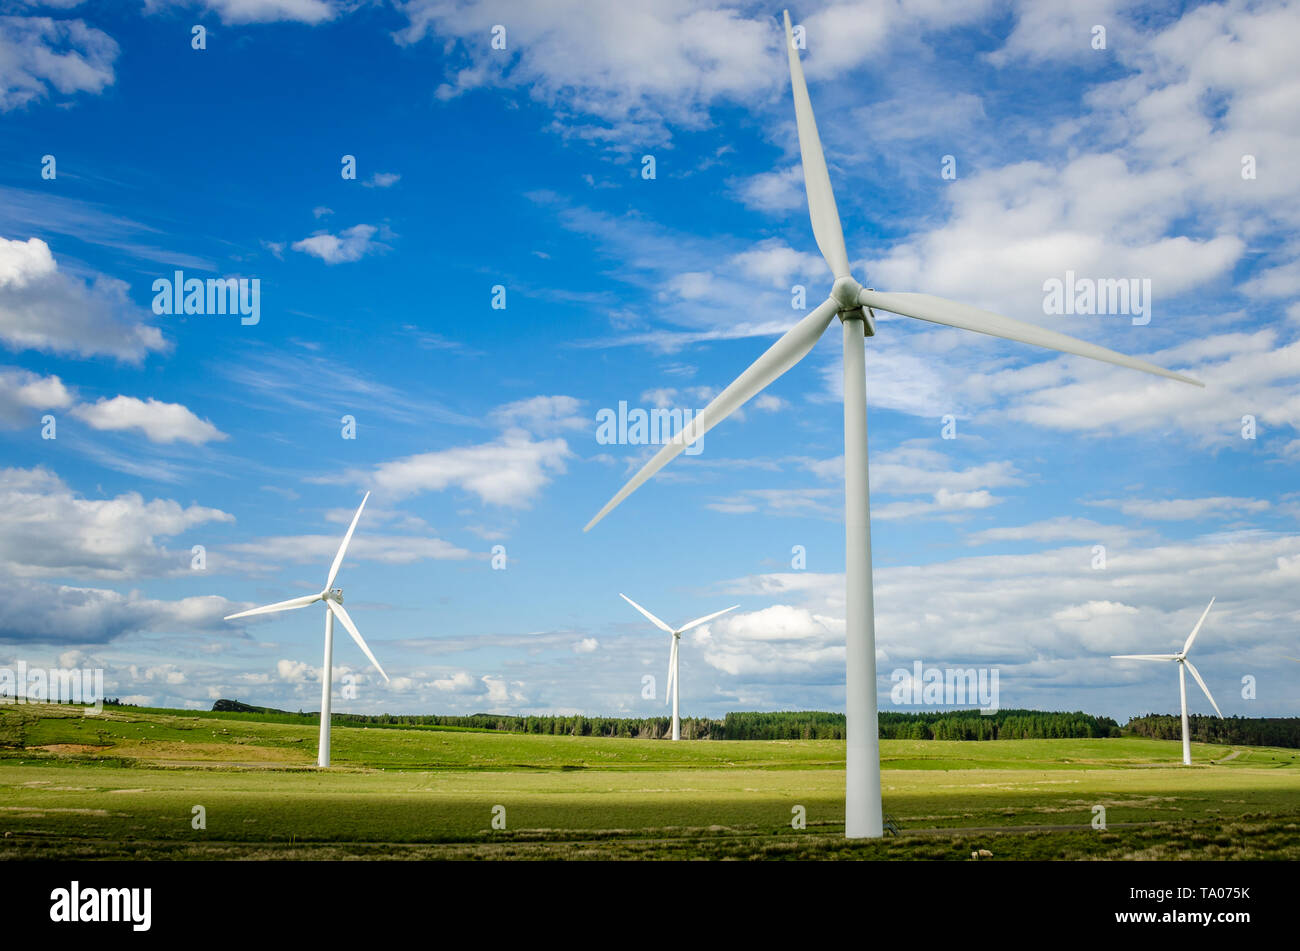 View of a wind farm in northumberland, UK, under blue sky with clouds on a spring day Stock Photo